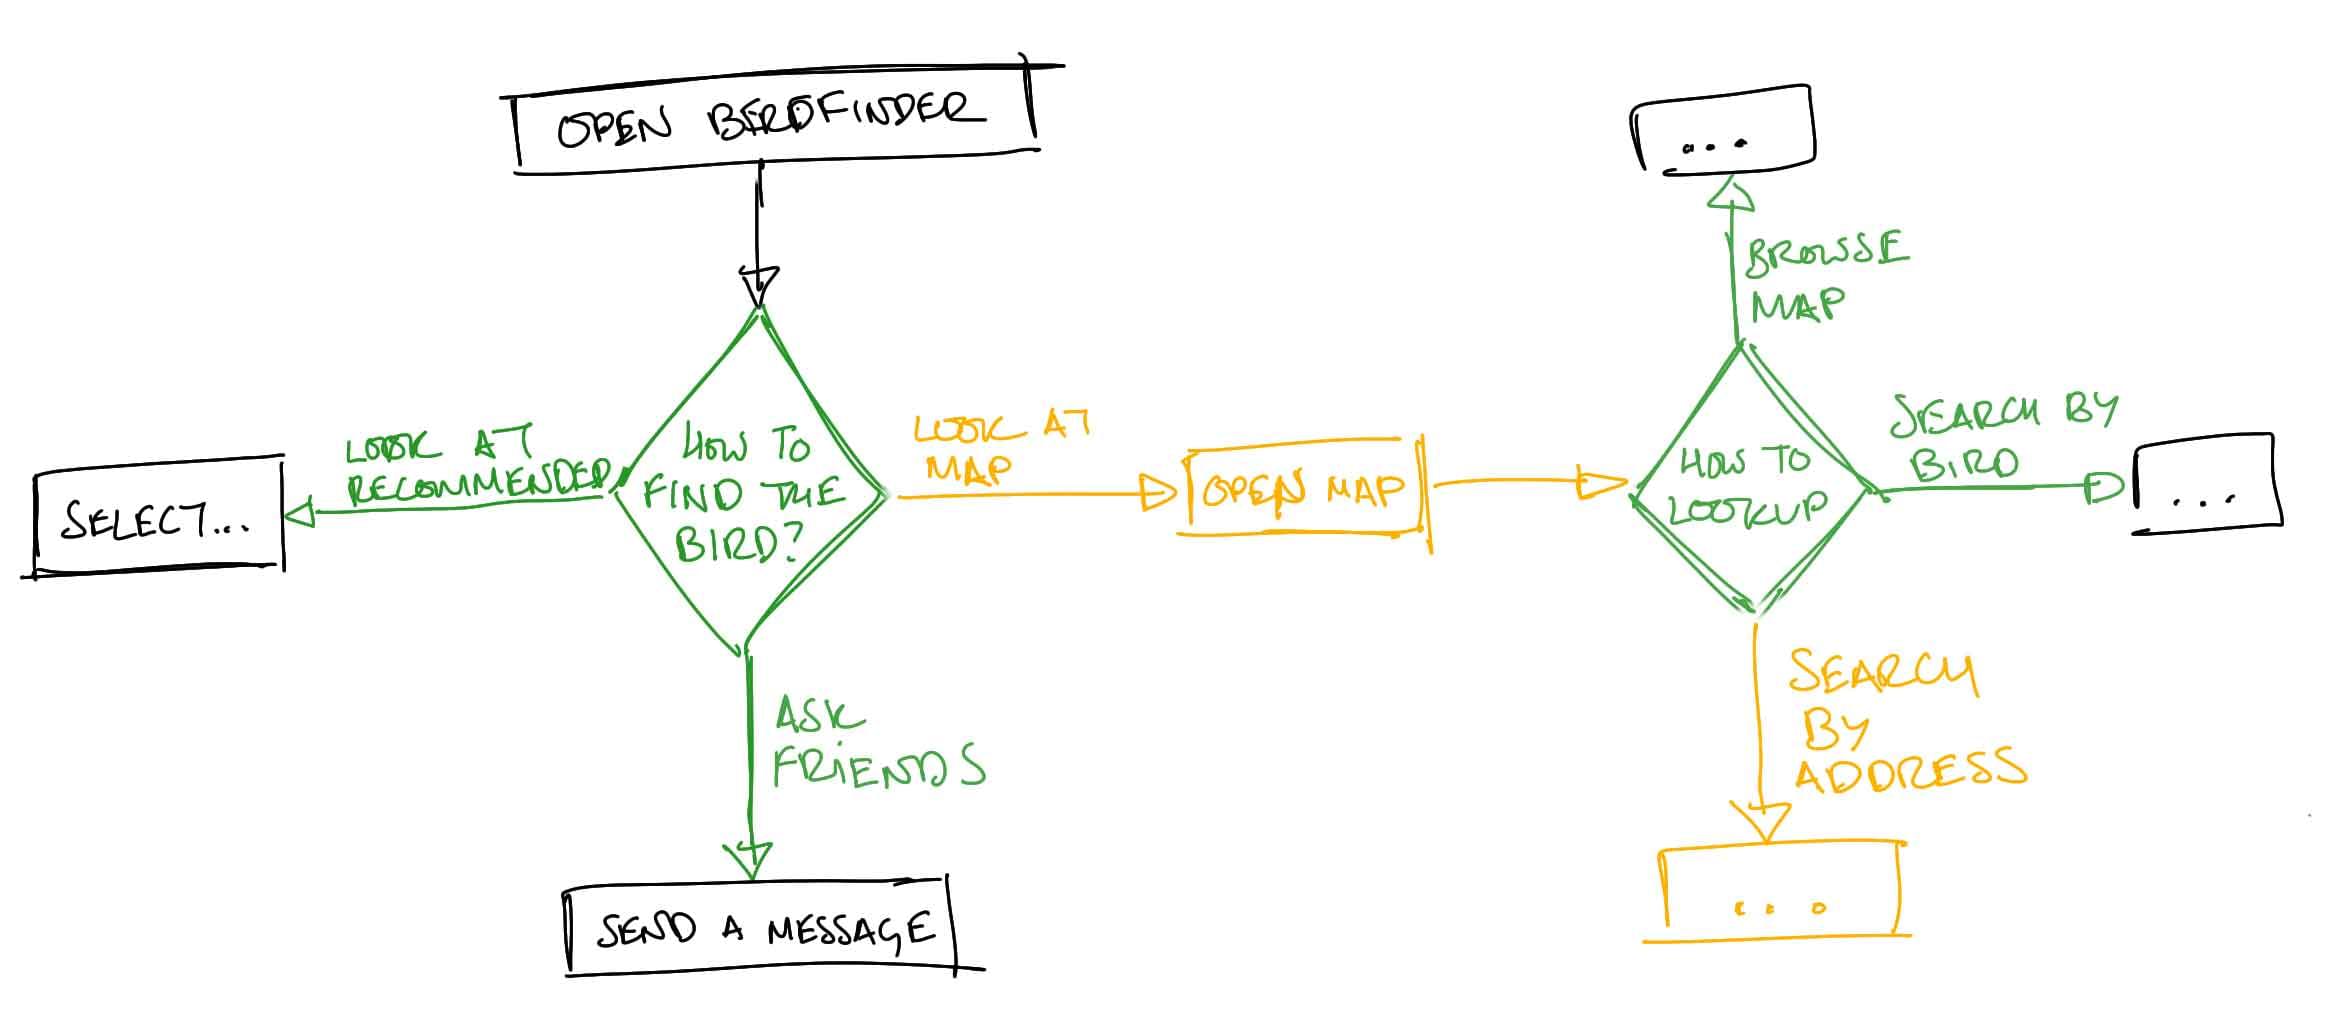 A flowchart illustrating the interaction options for BerdFinder